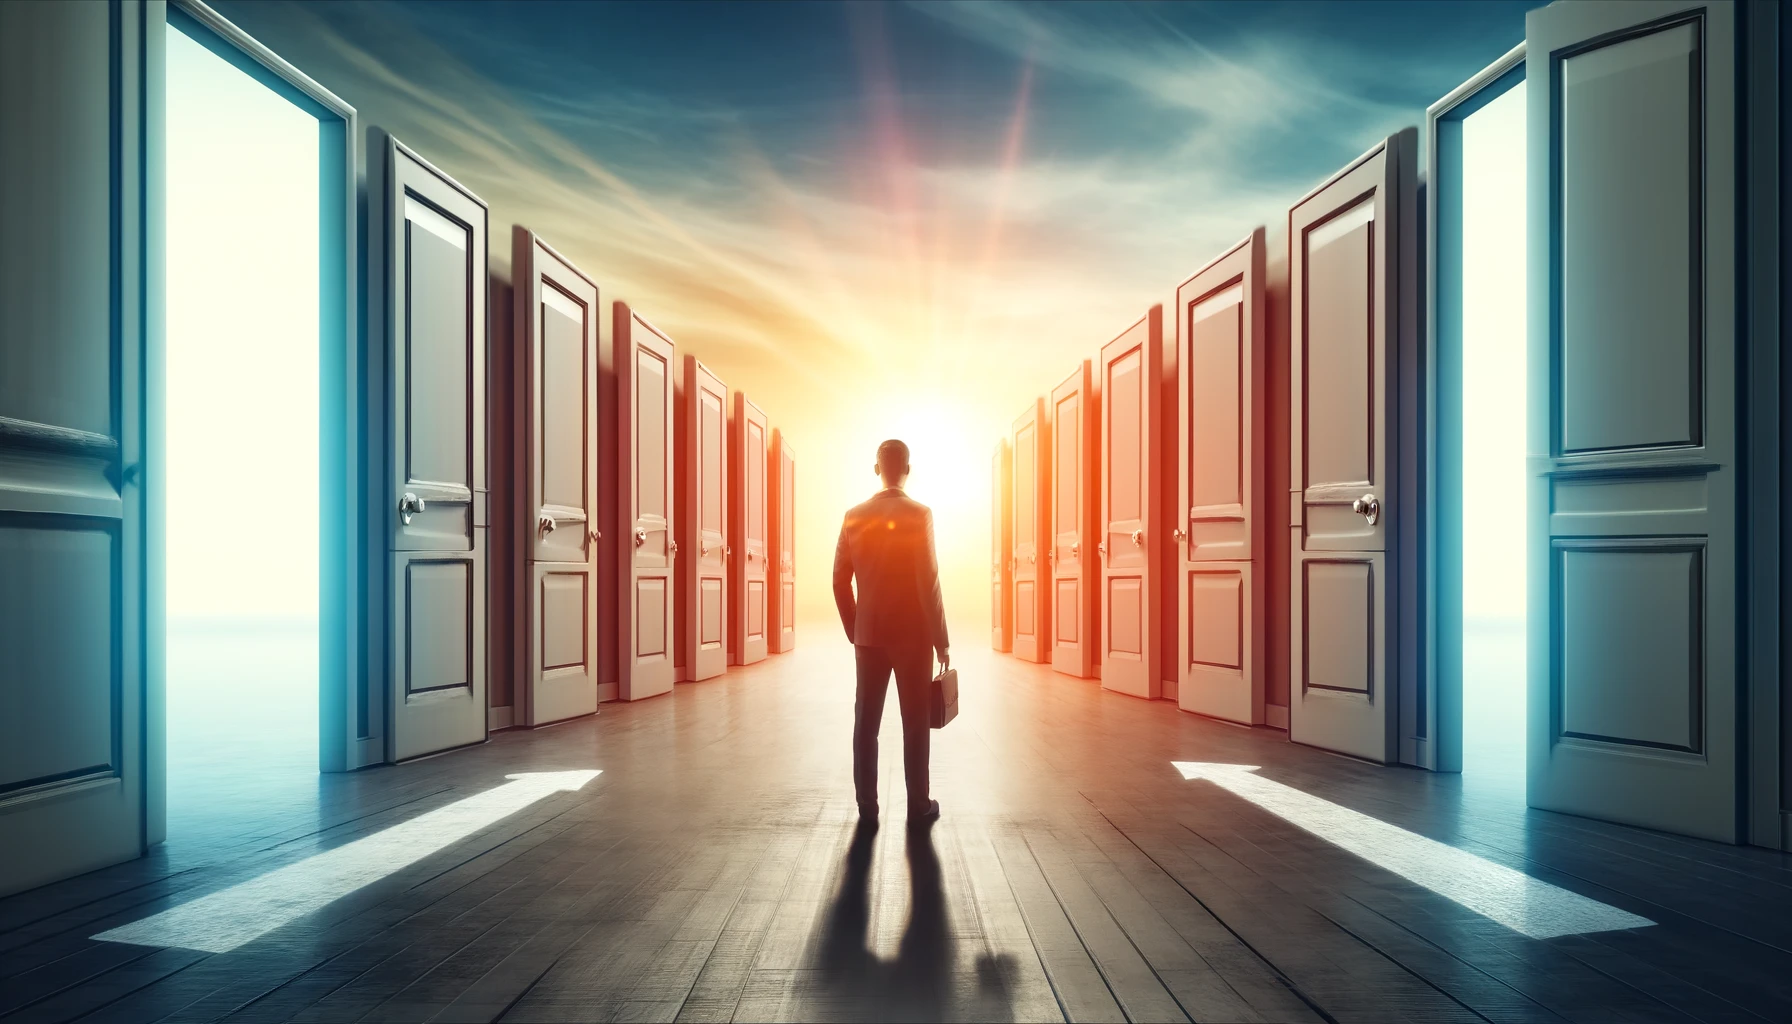 A determined person standing in front of a series of doors, each representing an opportunity. The background features a pathway leading to bright, sunny skies, symbolizing a journey towards success. The scene is vibrant and inspirational, emphasizing hard work, perseverance, and seizing opportunities.